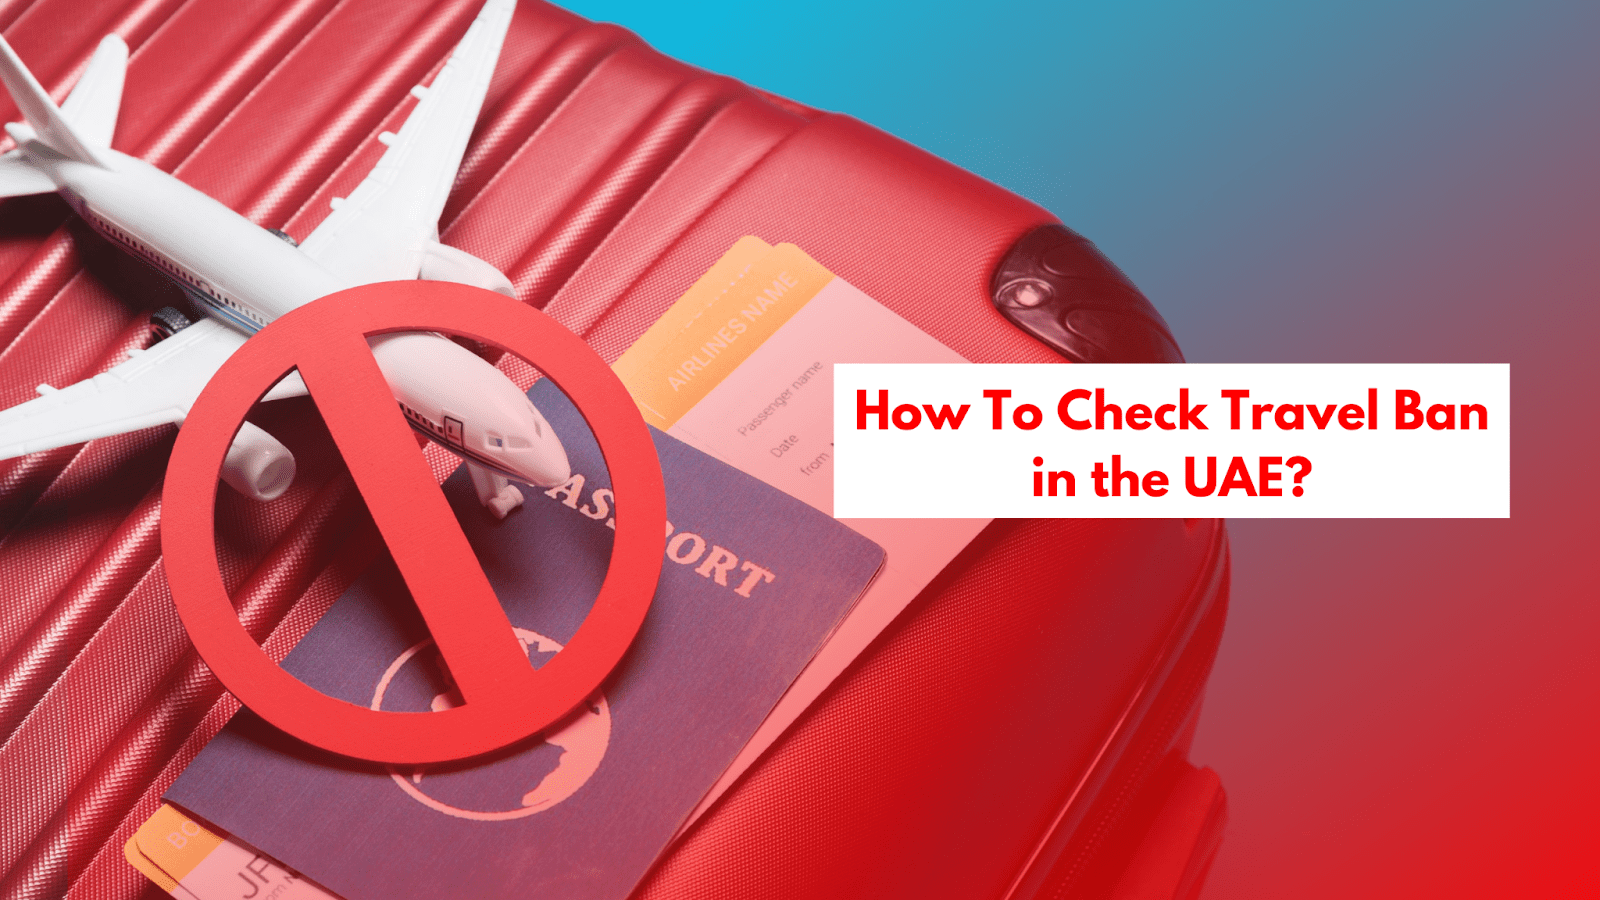 How to Check Travel Ban in UAE?